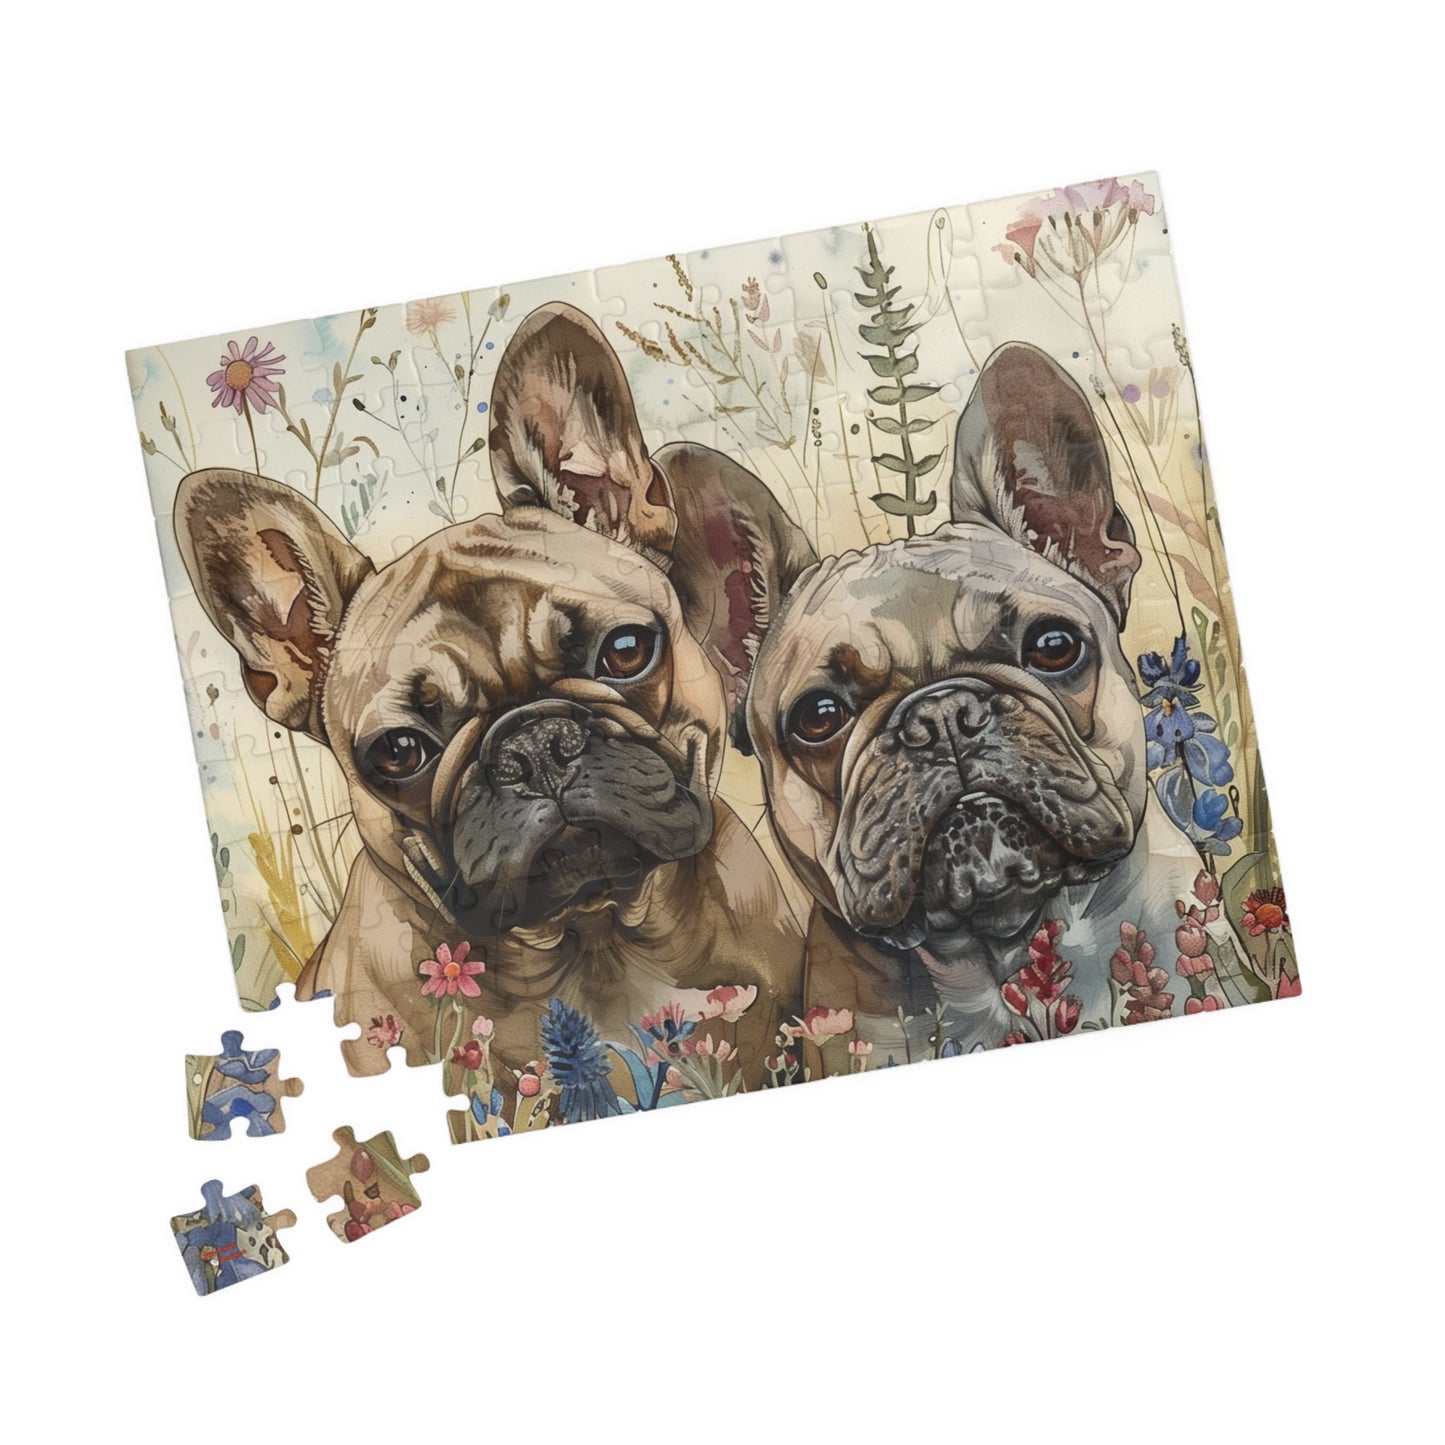 French Bulldog Pups Puzzle in Wildflowers (110, 252, 520, 1014-piece) Wildflowers Watercolor Jig Saw Family Pet K9 Canine Friend Buddy Tabletop Game 1000 500